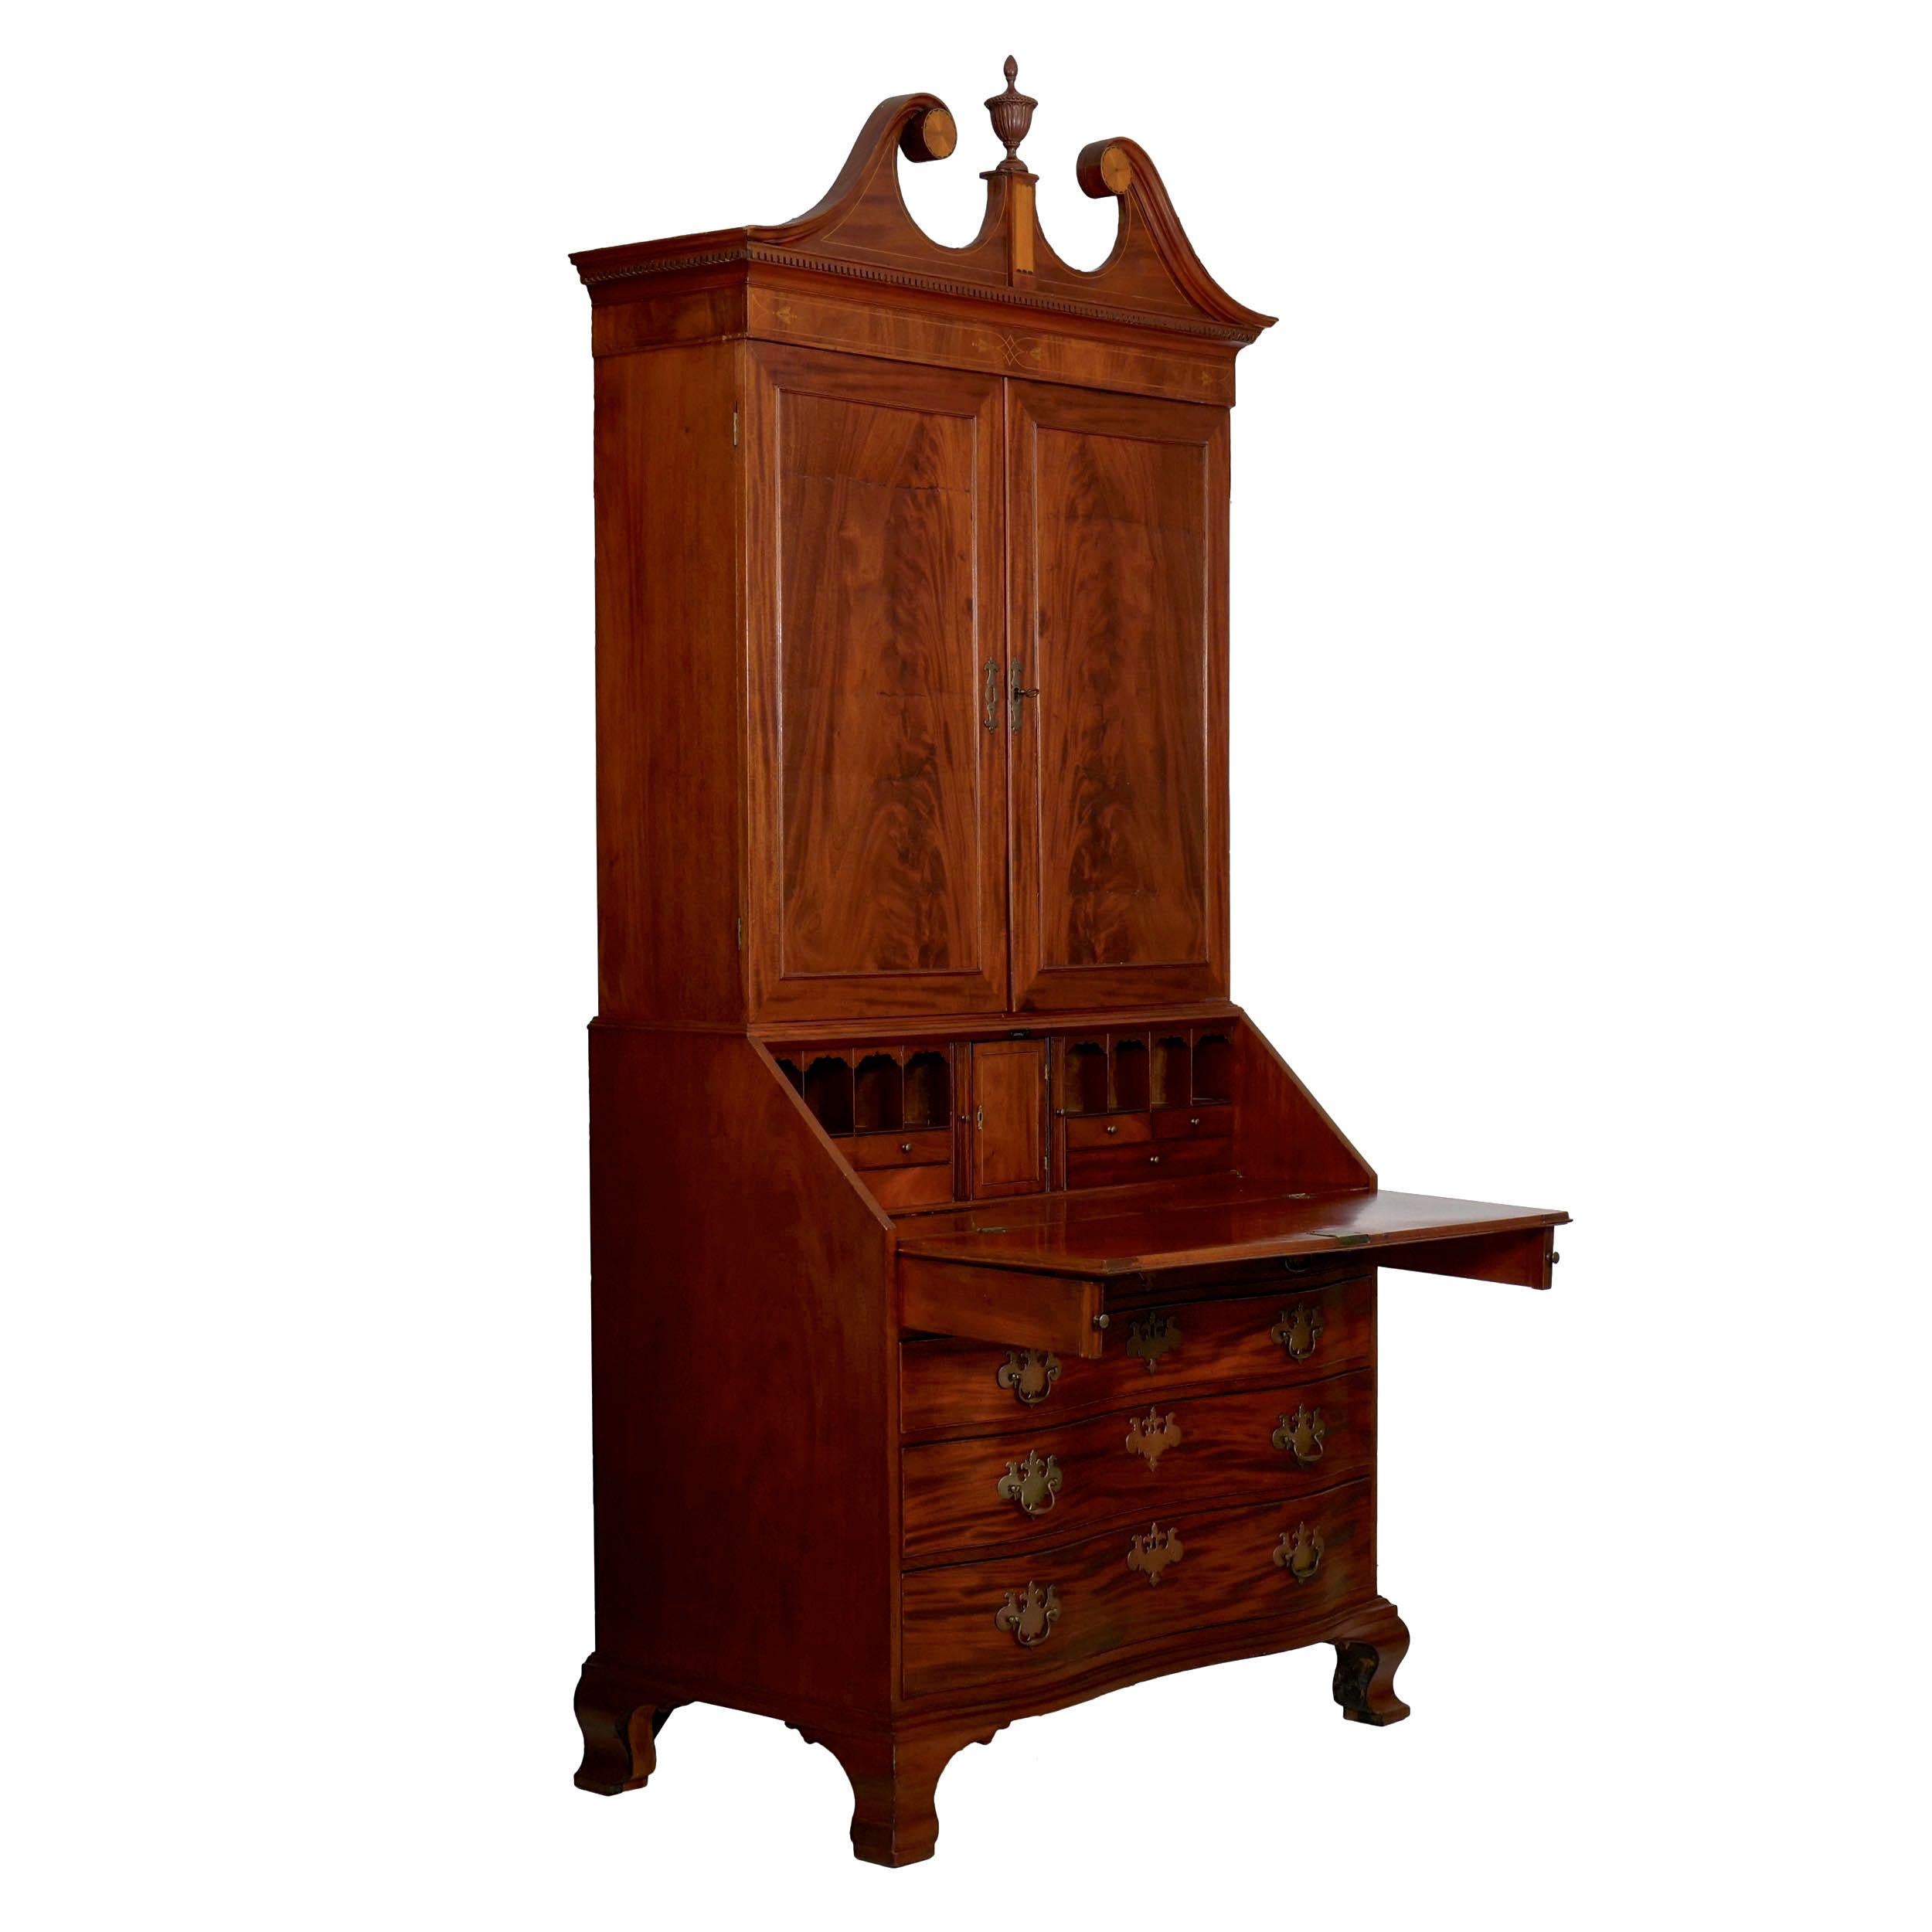 The crown is self-contained and lifts off of the bookcase, this crafted with open dovetails at the rear corners and affixing to the bookcase with screws. The swan's neck pediment is beautifully molded with an intricate patera pinwheel motif flanking